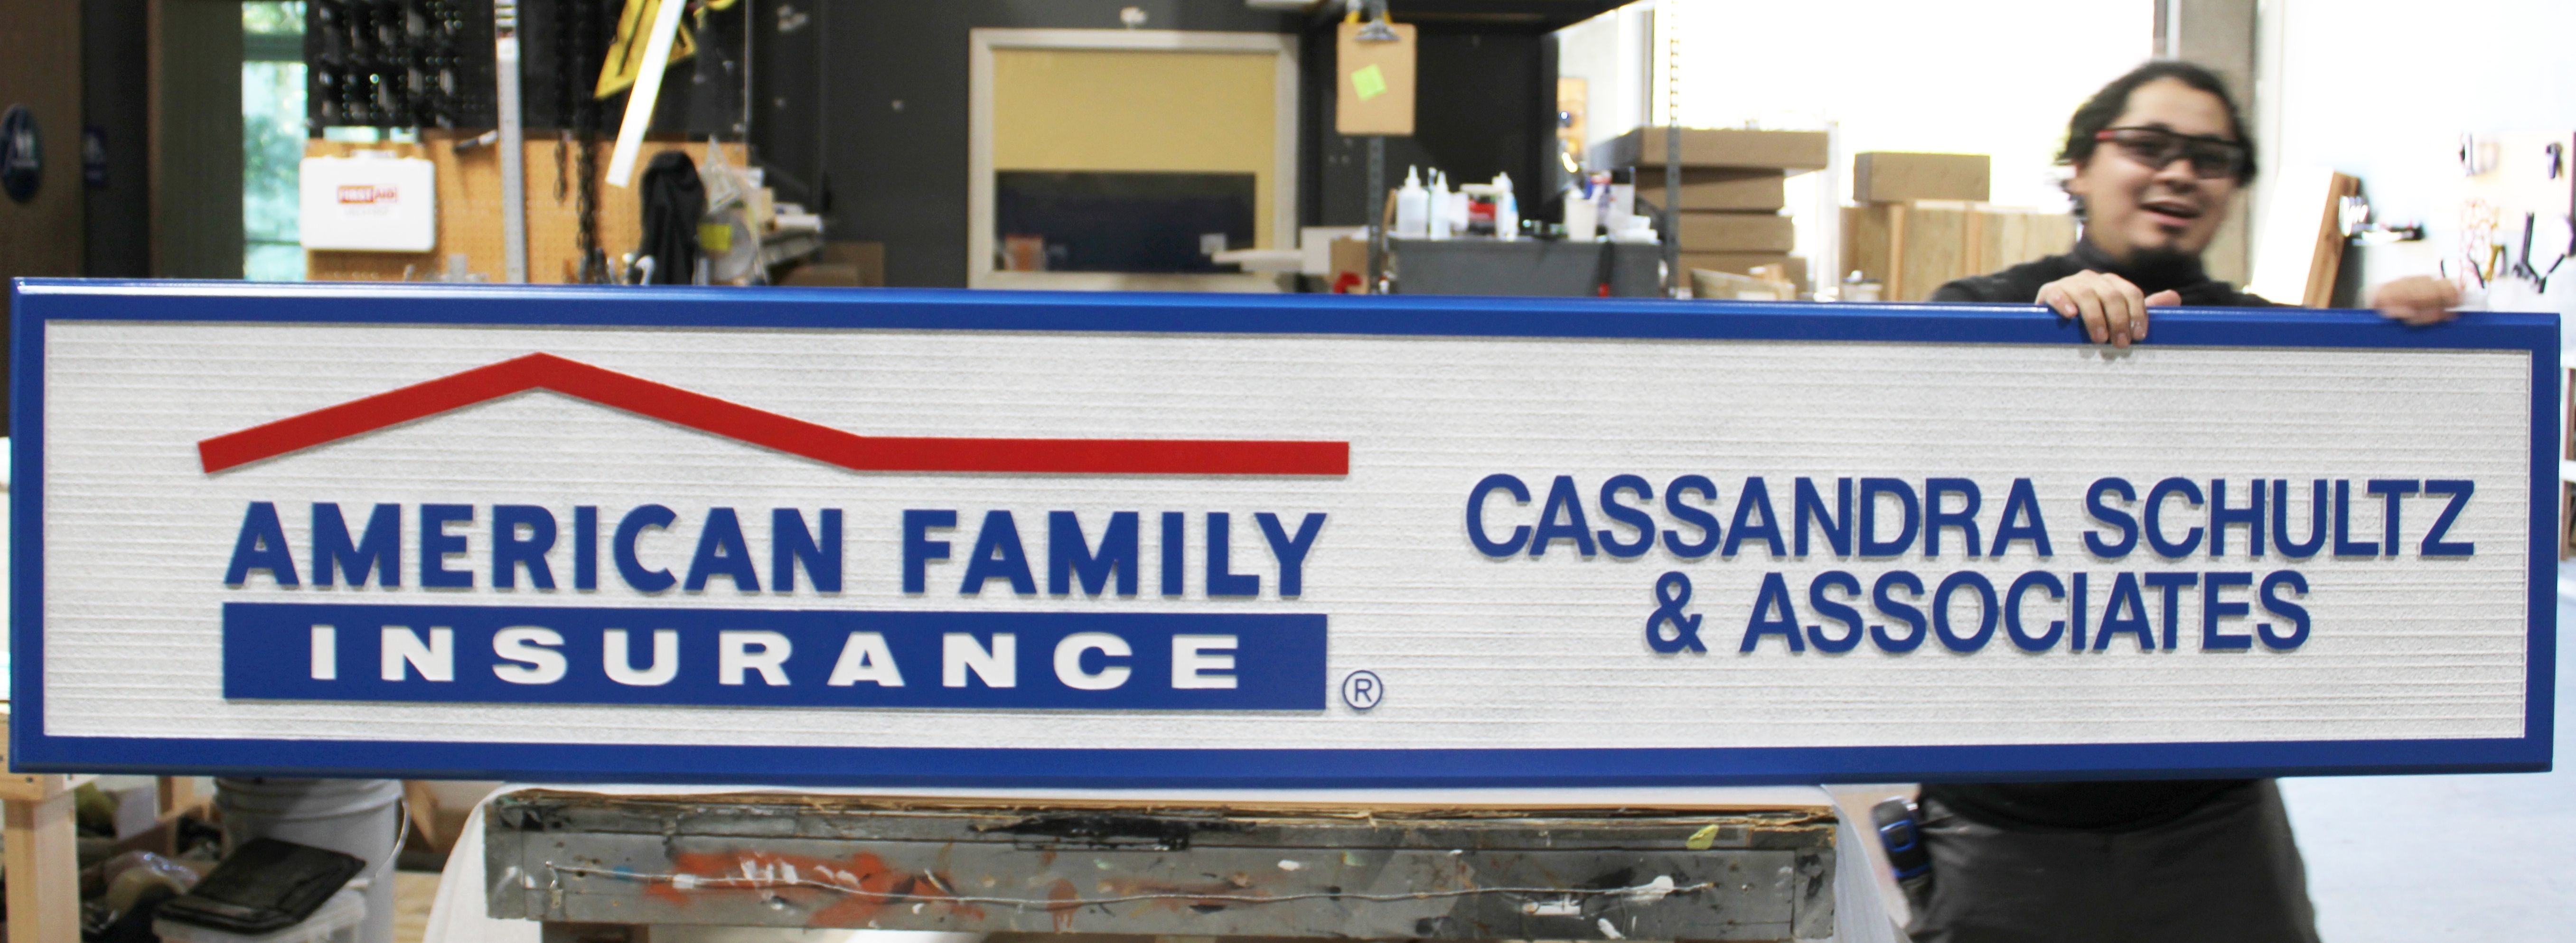 C12519 - Carved 2.5-D Raised Relief and Sandblasted Wood Grain HDU Sign for "American Family Insurance"